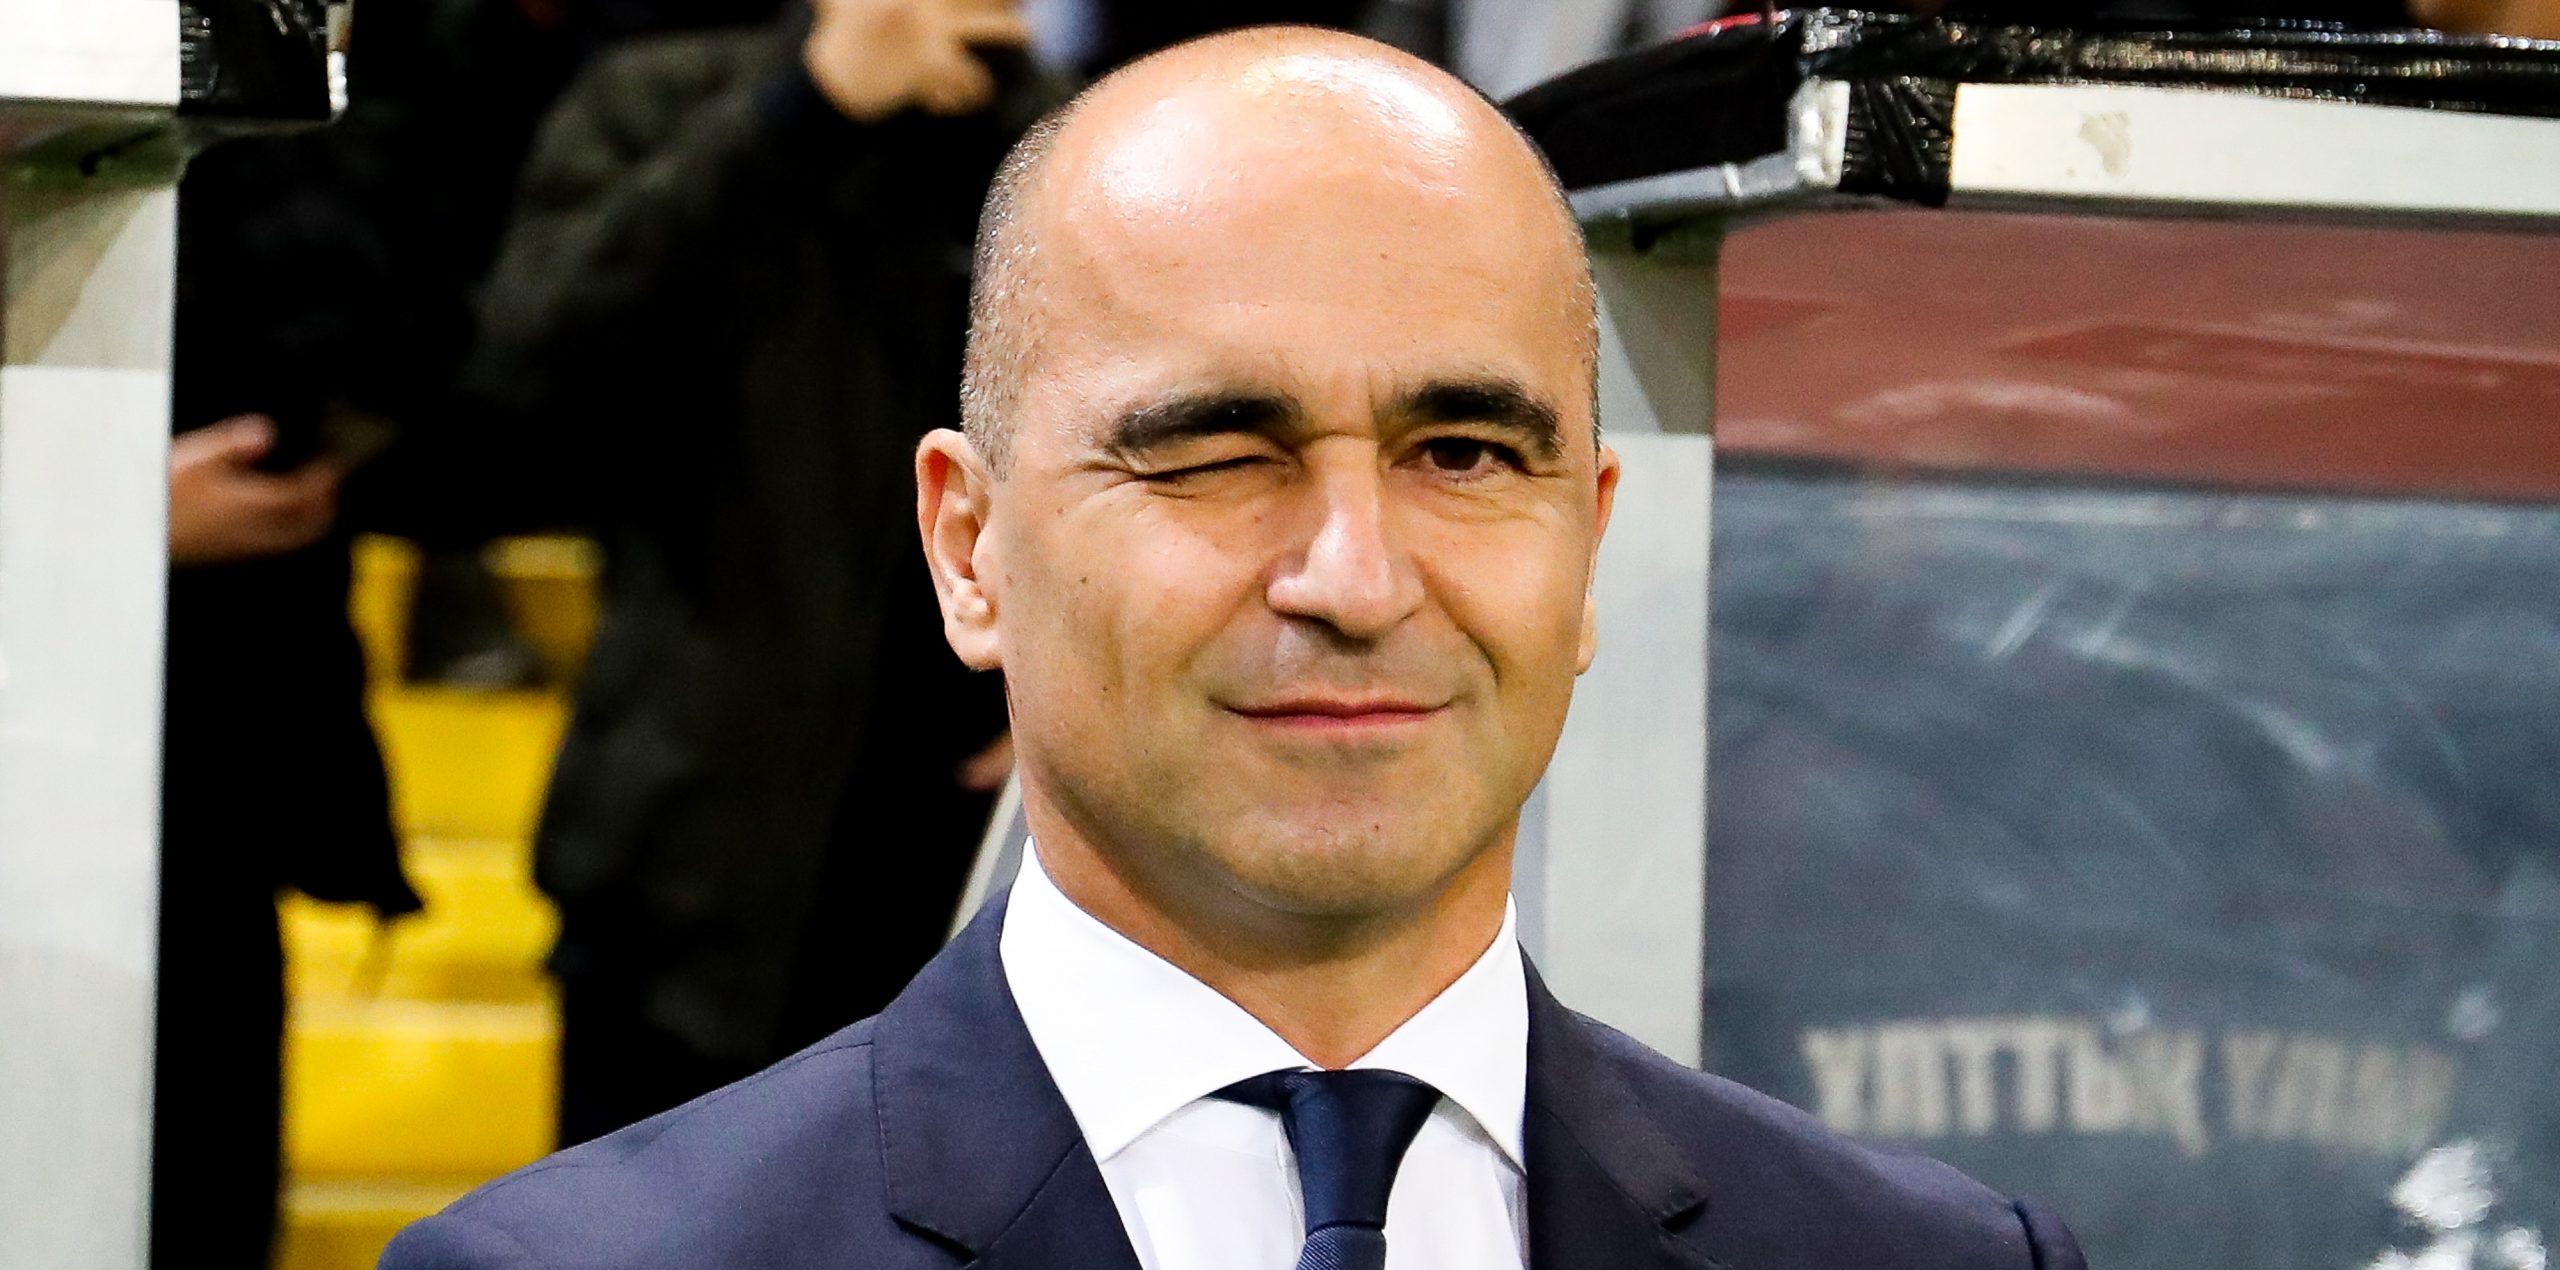 Belgium's head coach Roberto Martinez winking at the press during a Euro 2020 Qualifying game